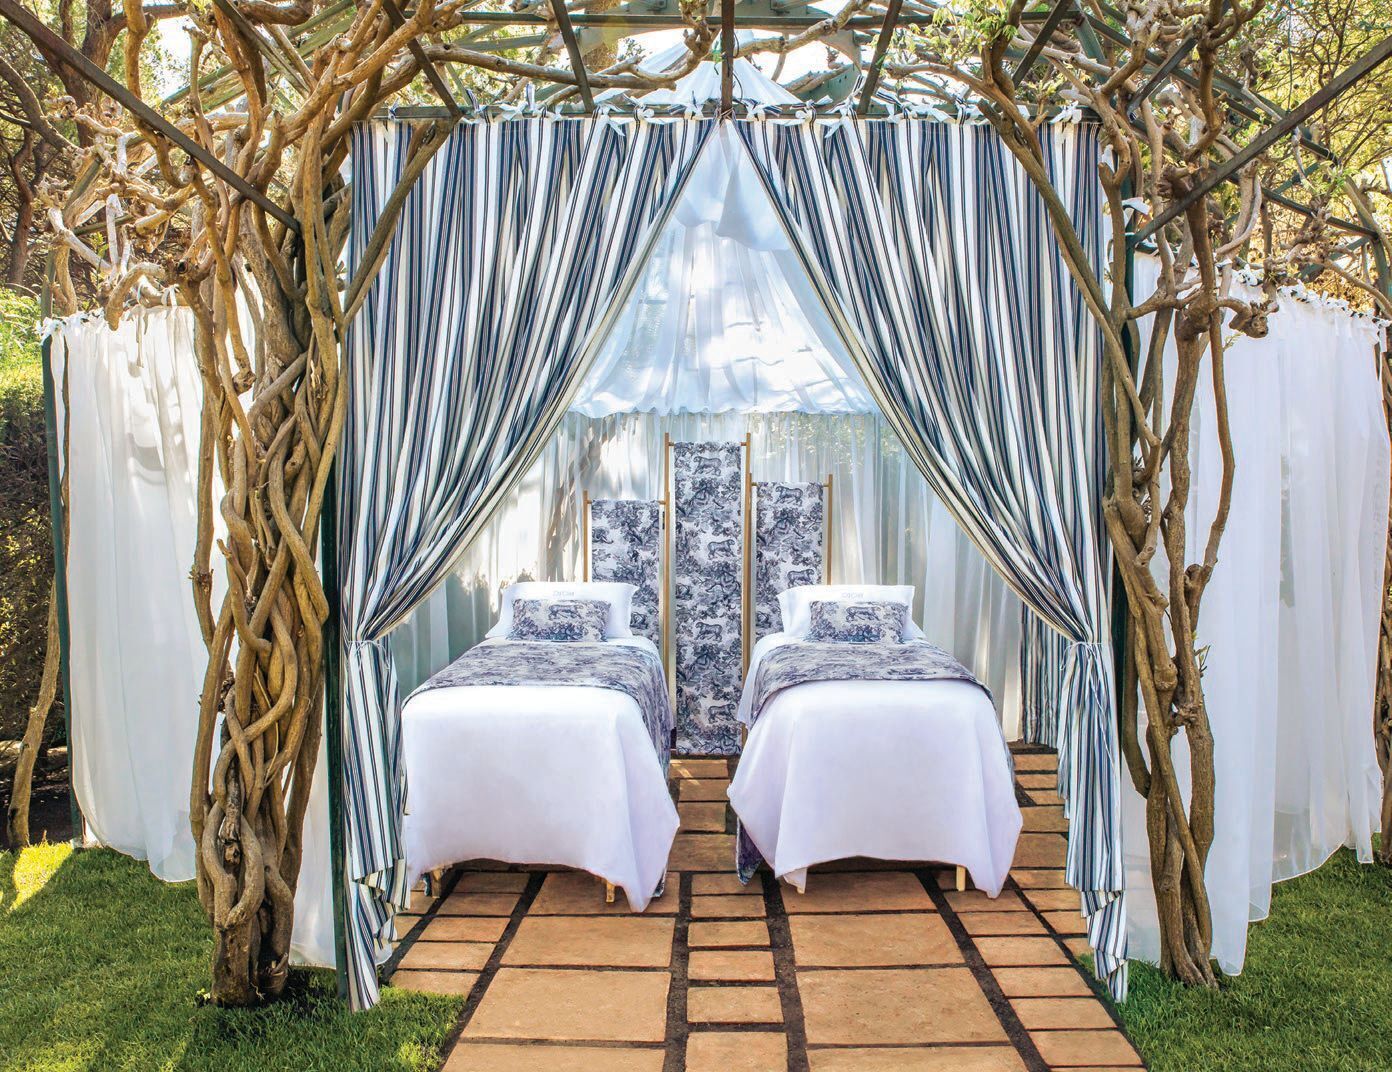 Enjoy your treatment in a gazebo facing the 100-year-old rose garden dedicated to Queen Elizabeth II PHOTO COURTESY OF BRAND